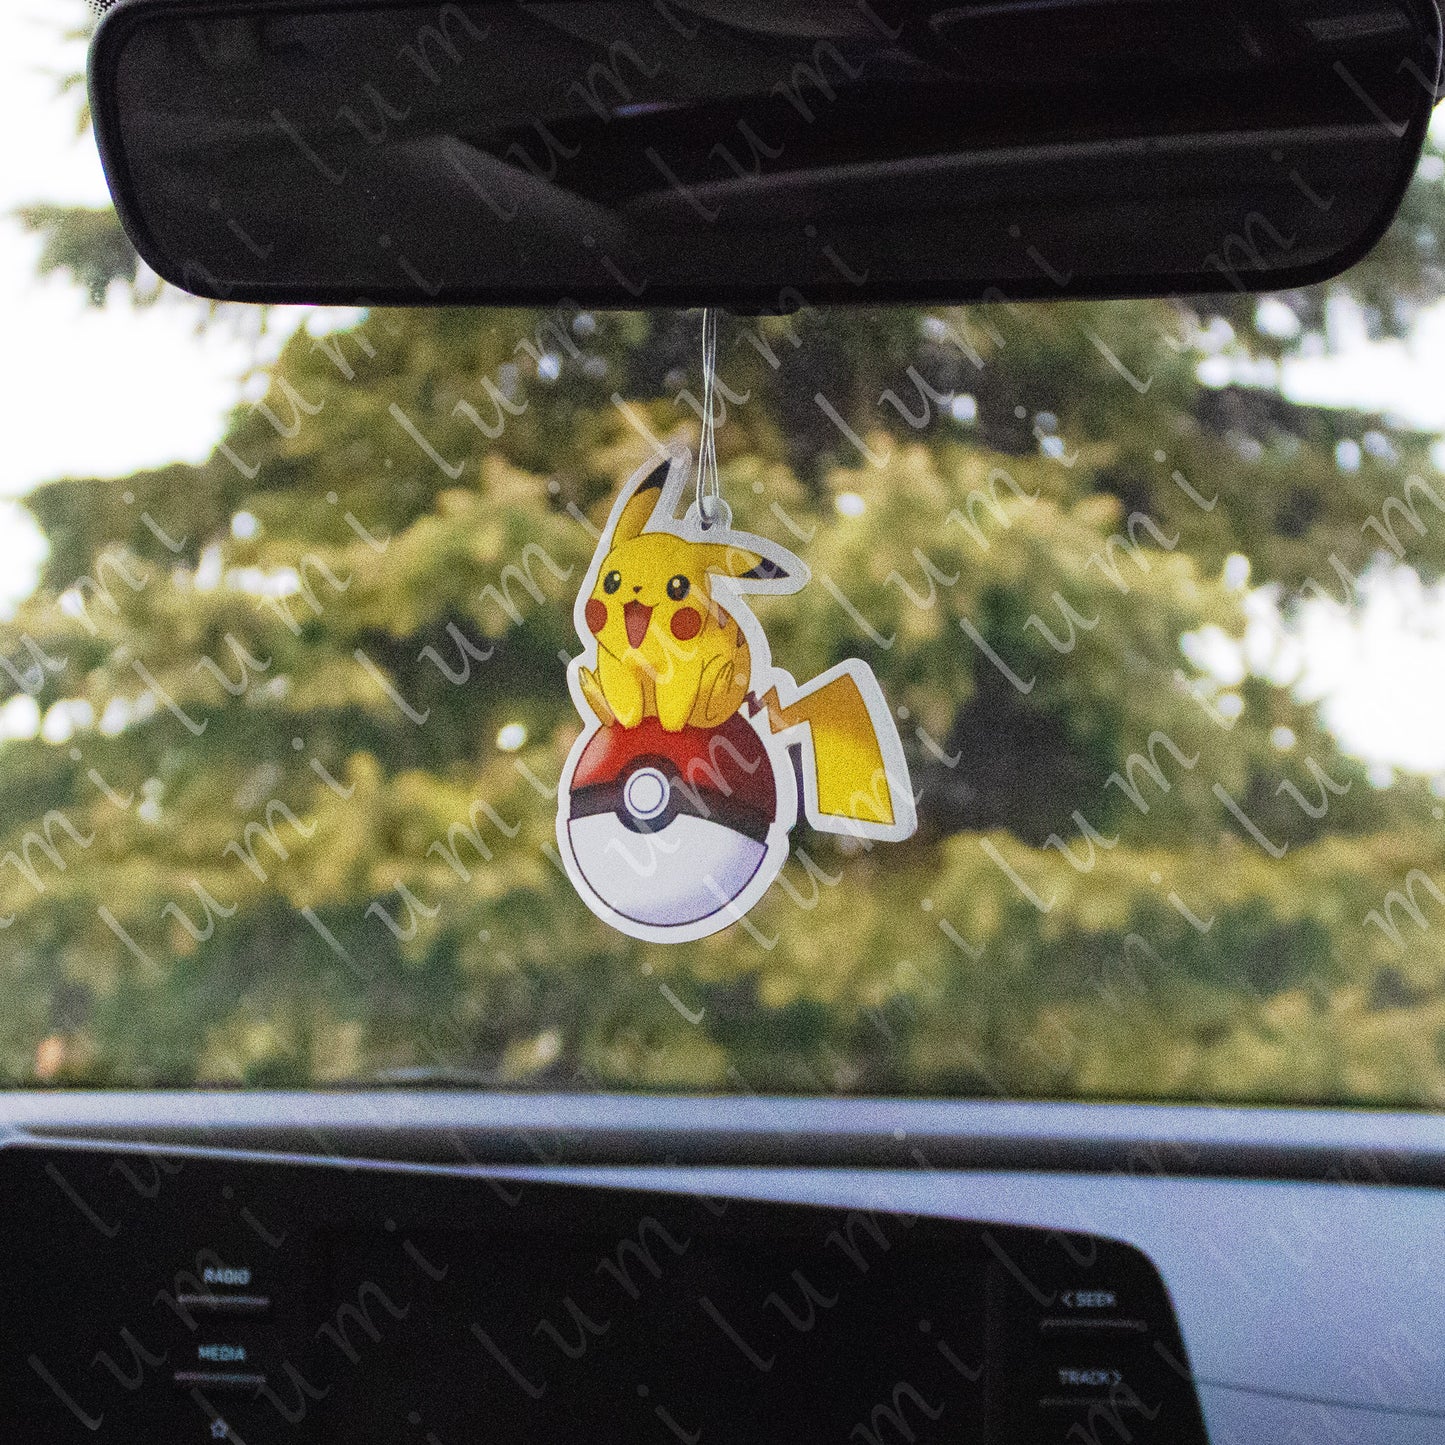 Image of a Pikachu air freshener with a pokeball design, suitable for use in a car or other small spaces. The air freshener features a cute and colorful Pikachu on a pokeball, surrounded by fresh-scented aroma.